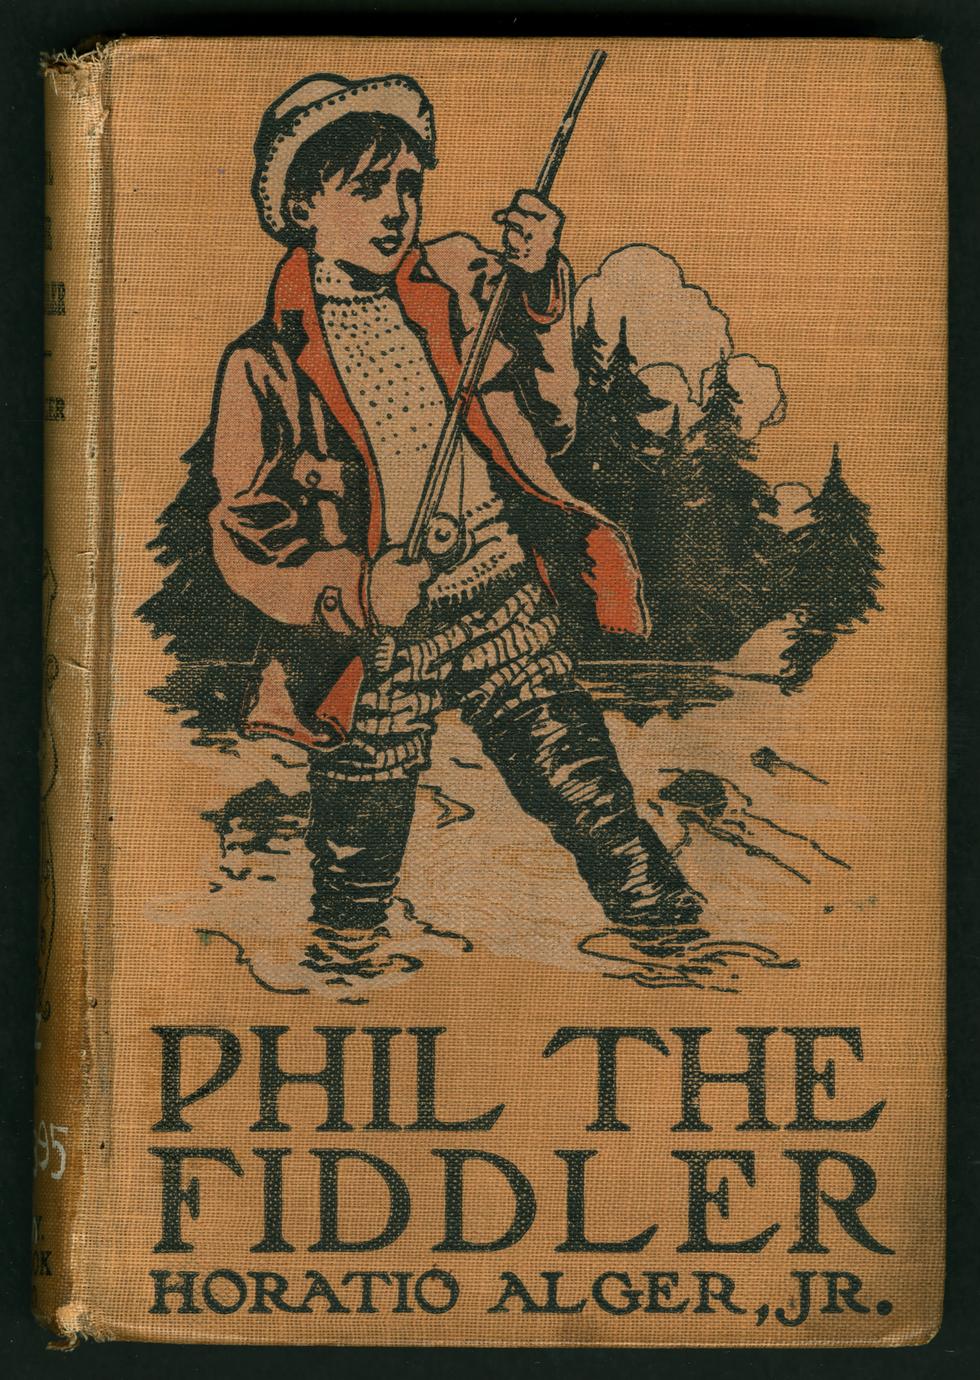 Phil the fiddler (1 of 2)